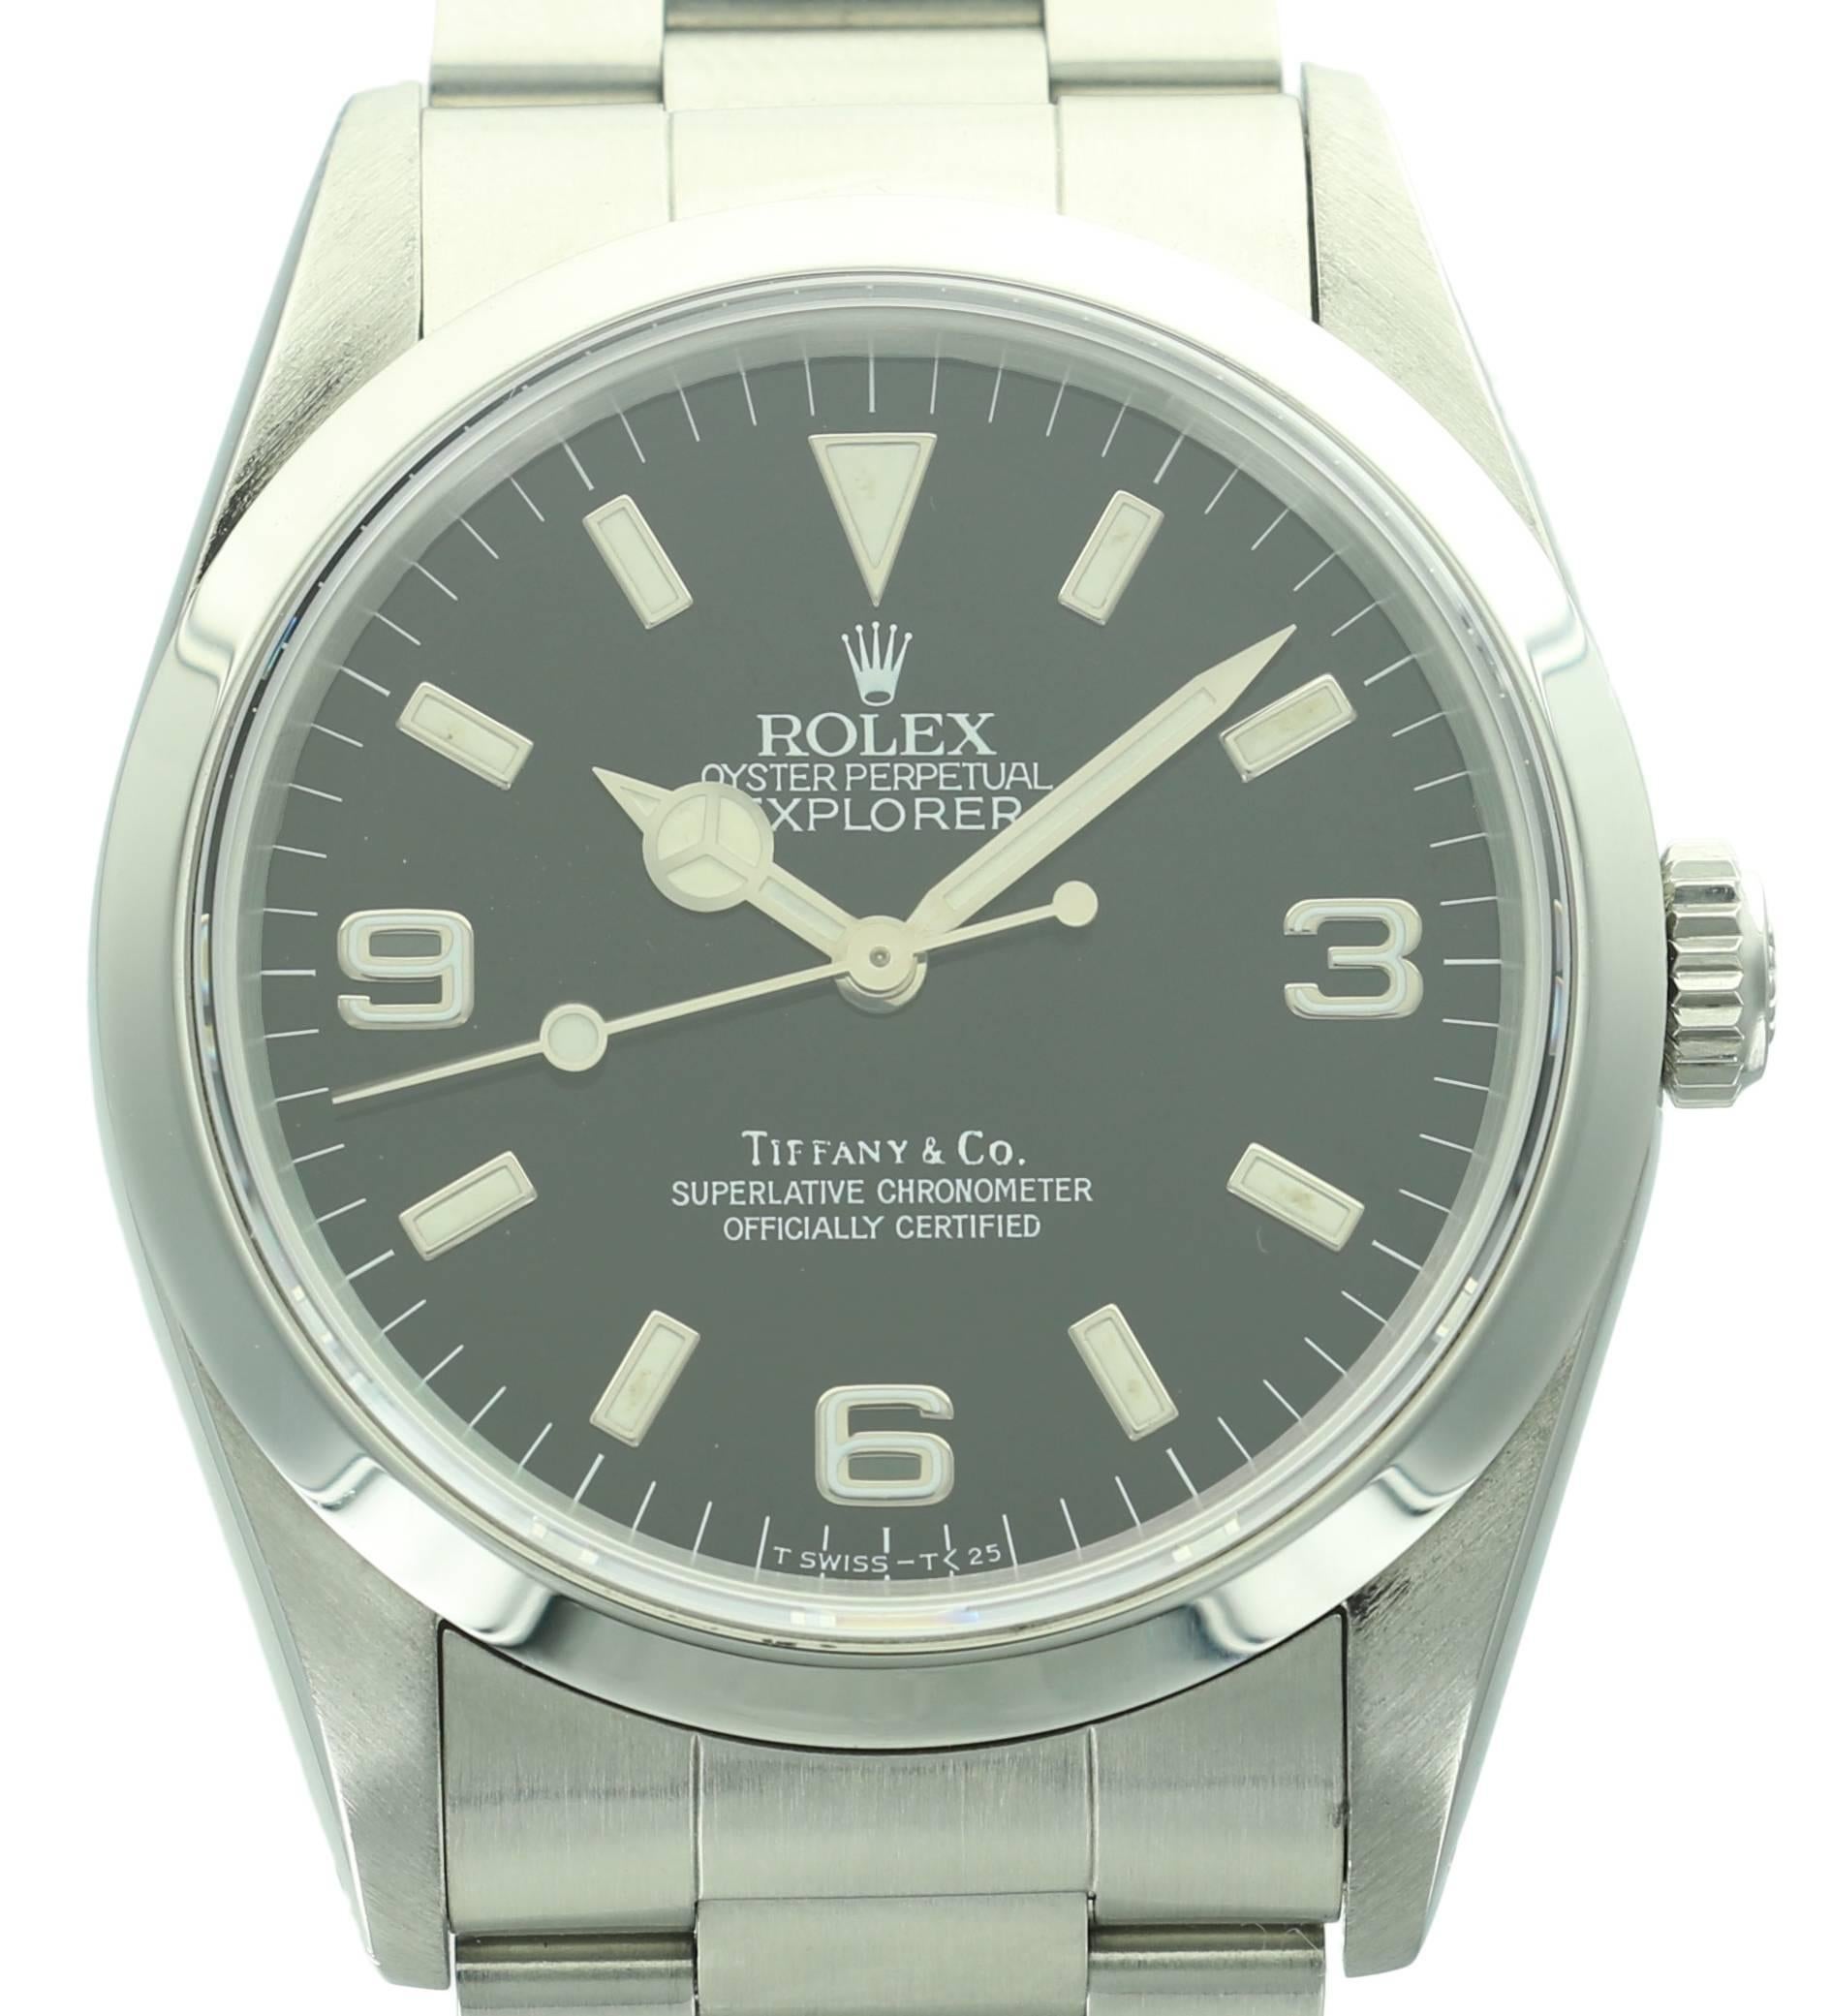 The Rolex Explorer is one of the brands most popular and well known models, having been produced since it's inception in 1953. This Explorer, a reference 14270, was originally retailed by Tiffany & Co. and features a Tiffany & Co. printed dial. It